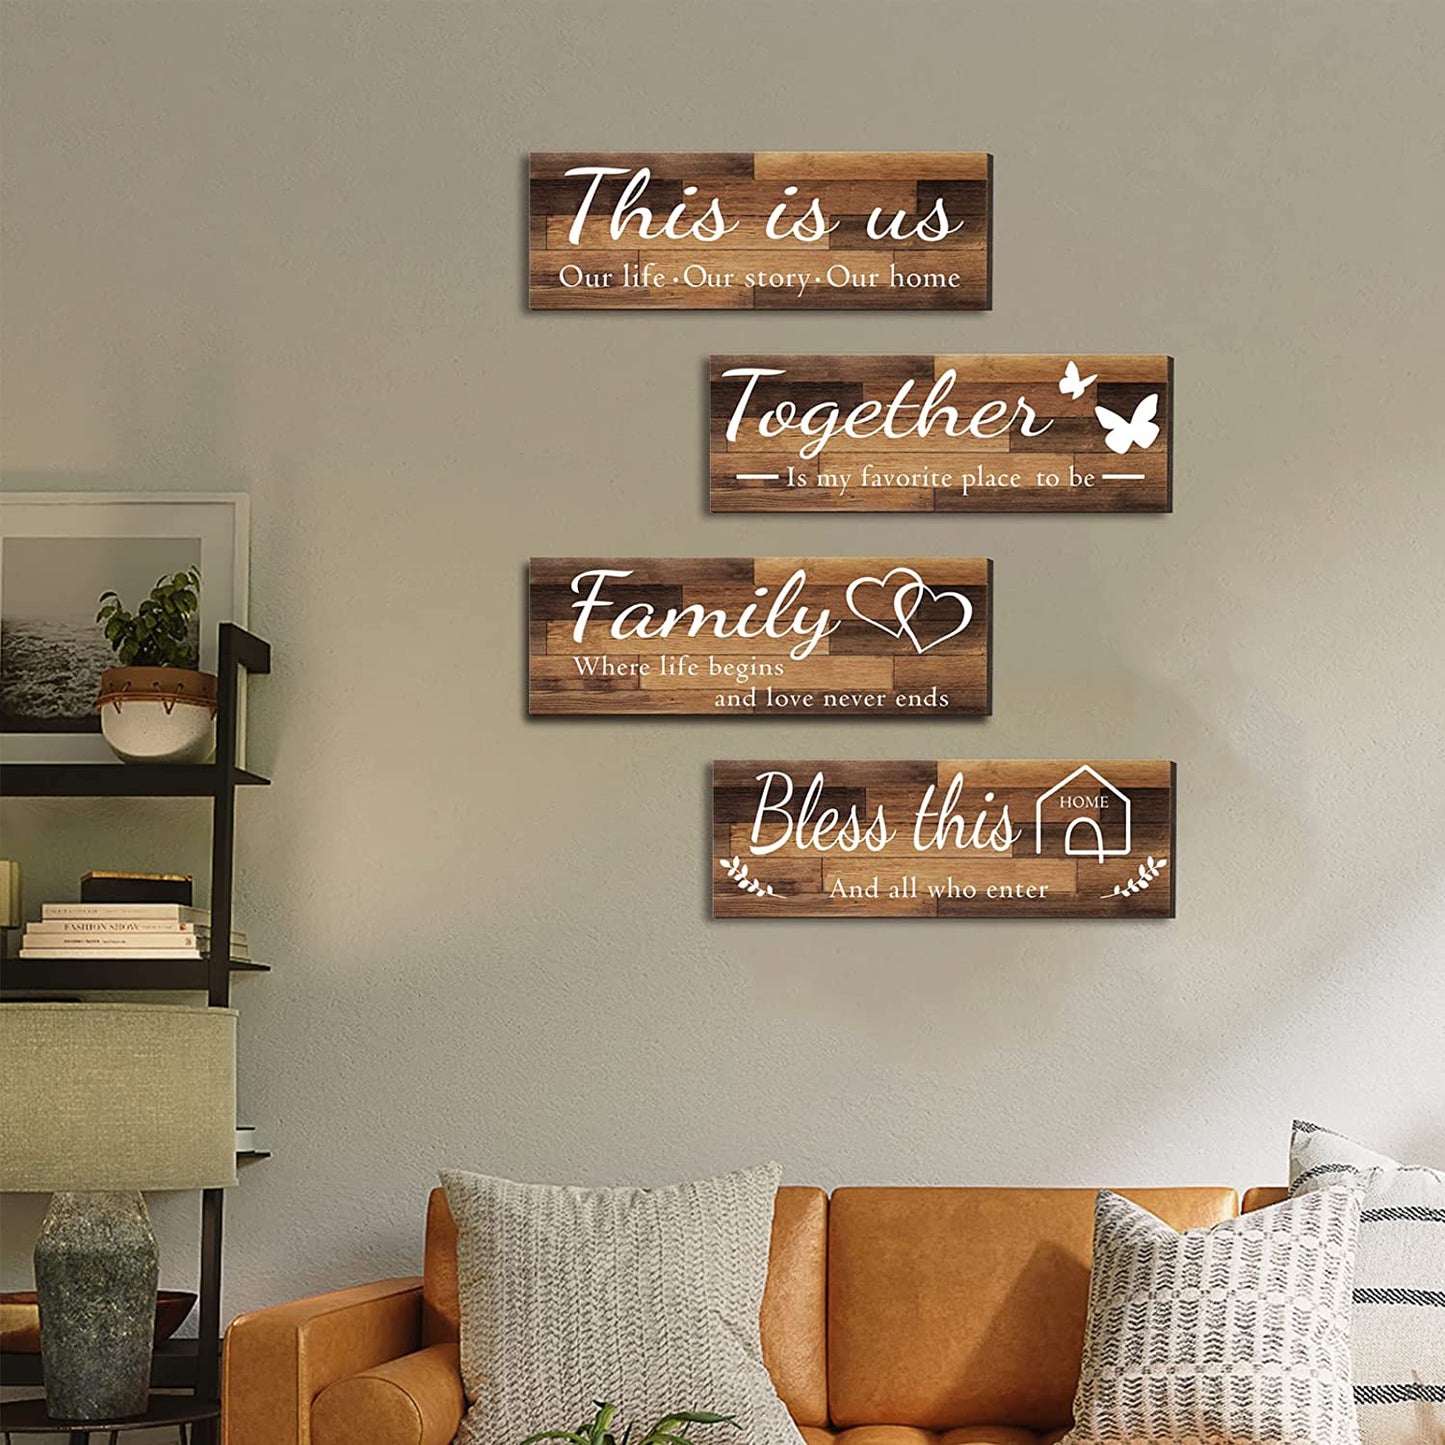 4 Pieces Home Wall Decor Signs, THIS IS US/TOGETHER/BLESS THIS HOME/FAMILY Wall Decor For Living Room Bedroom, Rustic Wooden Farmhouse Wall Art Decor, 4.7 x 13.8 Inch(Brown)